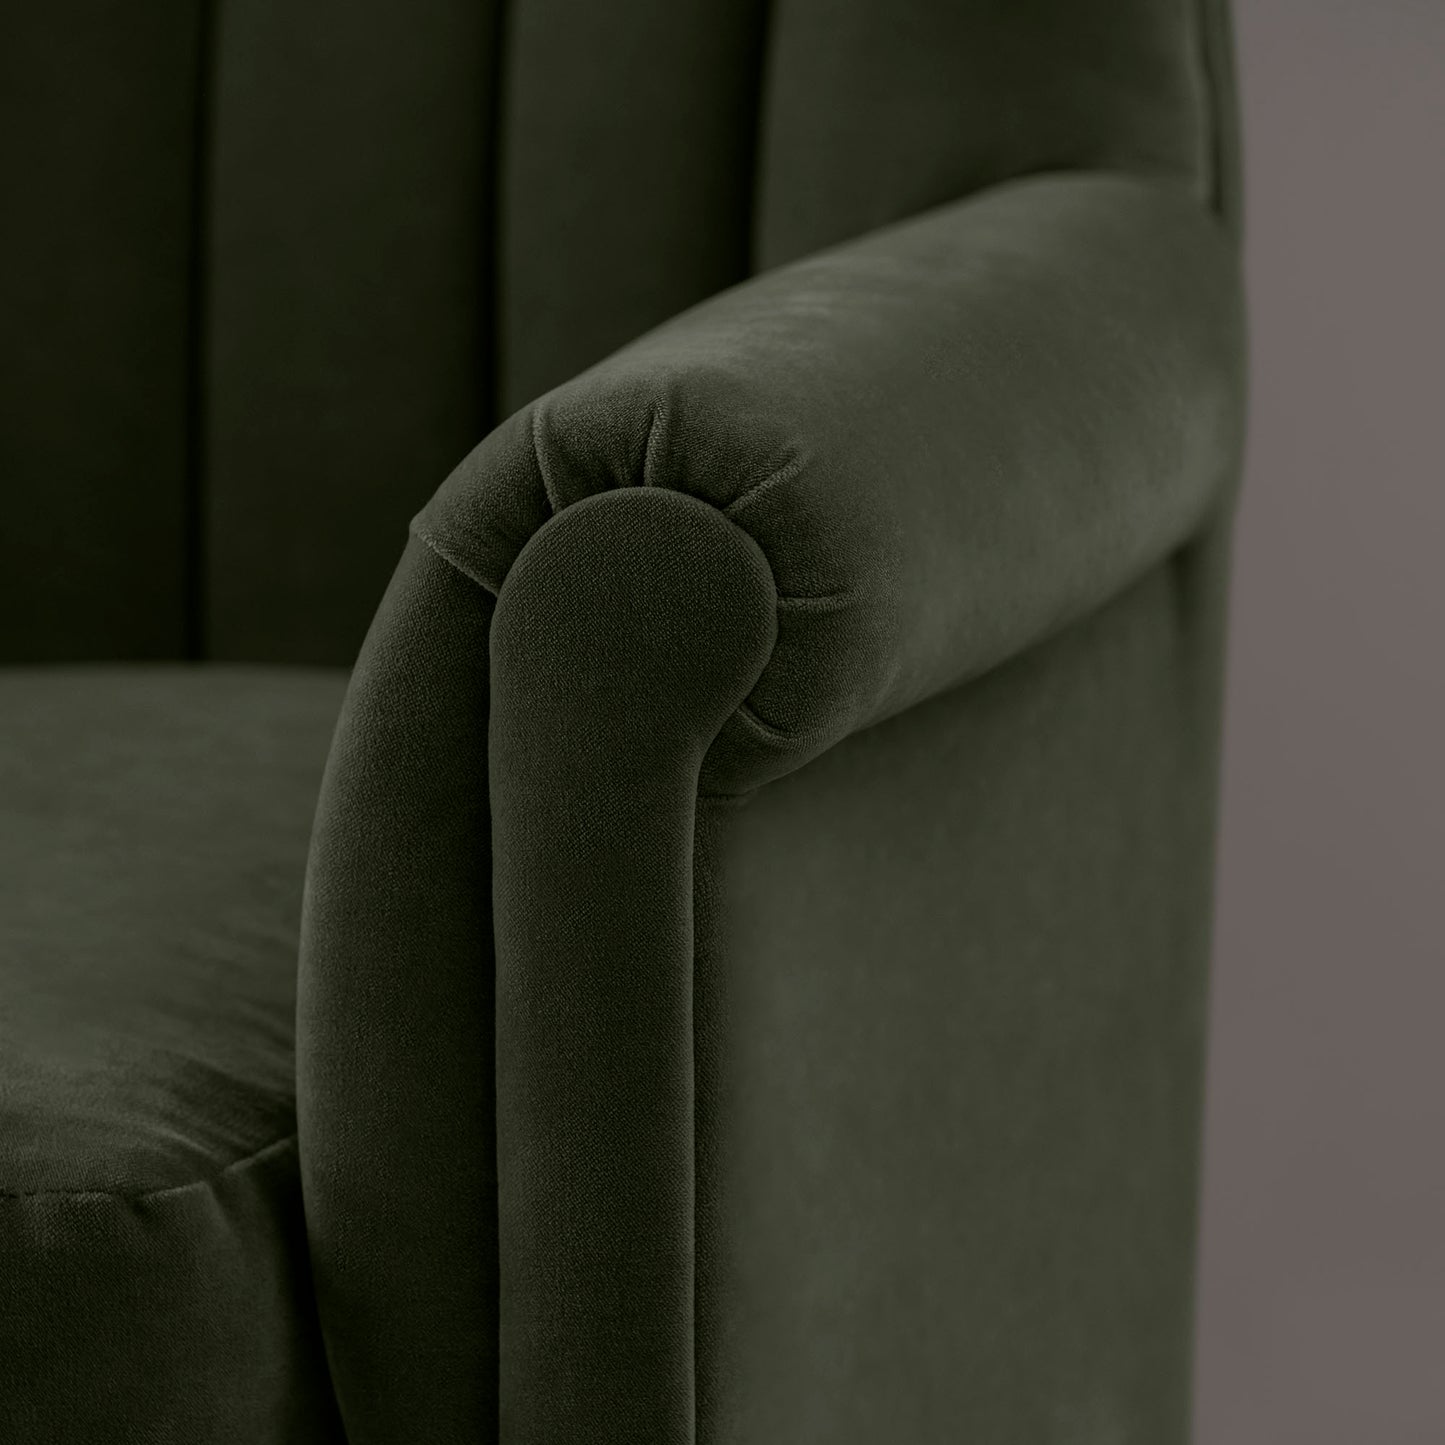 Time Out Armchair in Intelligent Velvet Seaweed